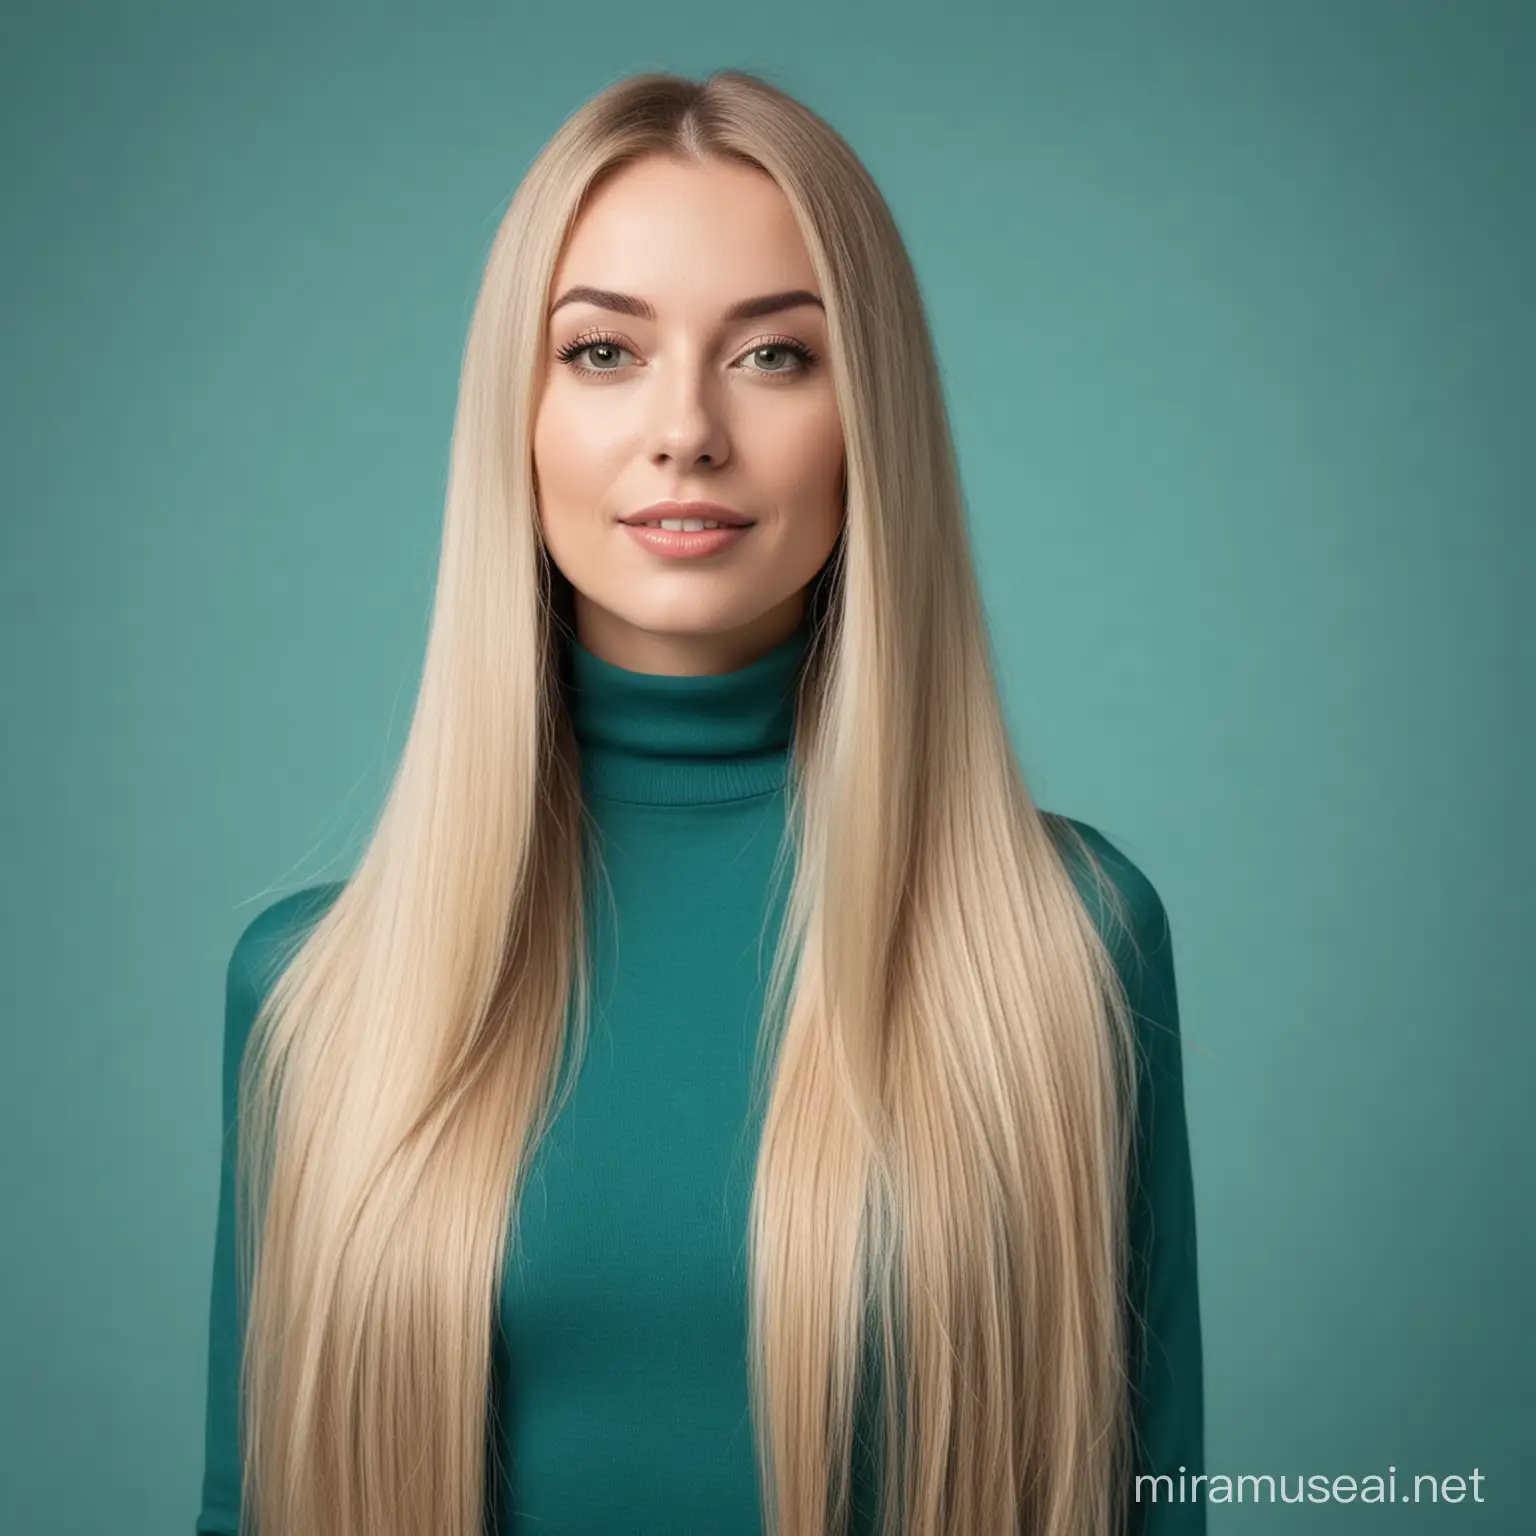 Elegant White Woman with Flowing Straight Hair on Teal Background